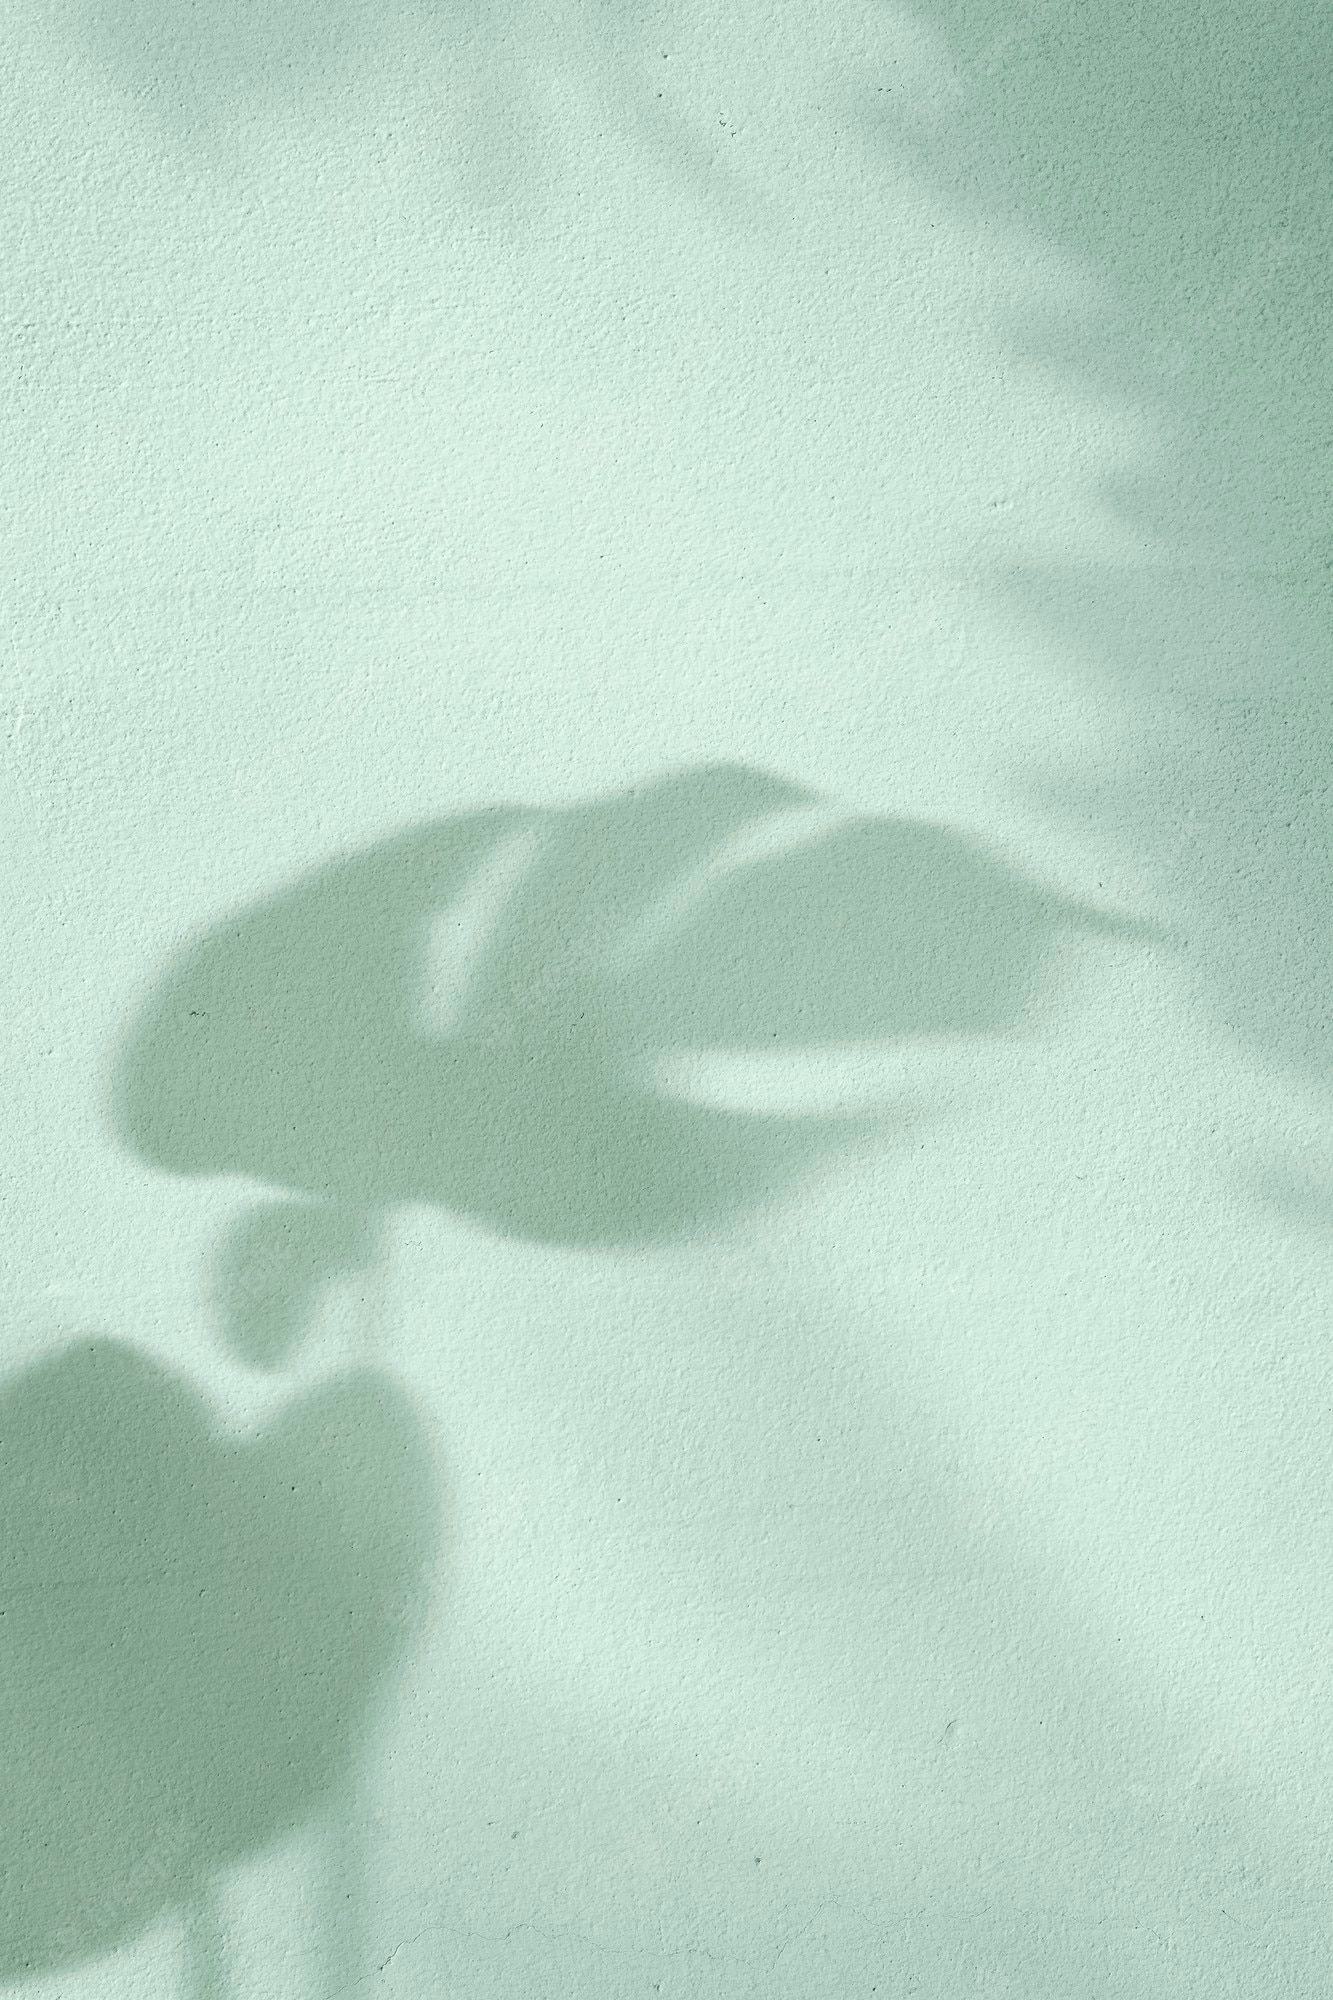 Shadow of a plant on a wall - Mint green